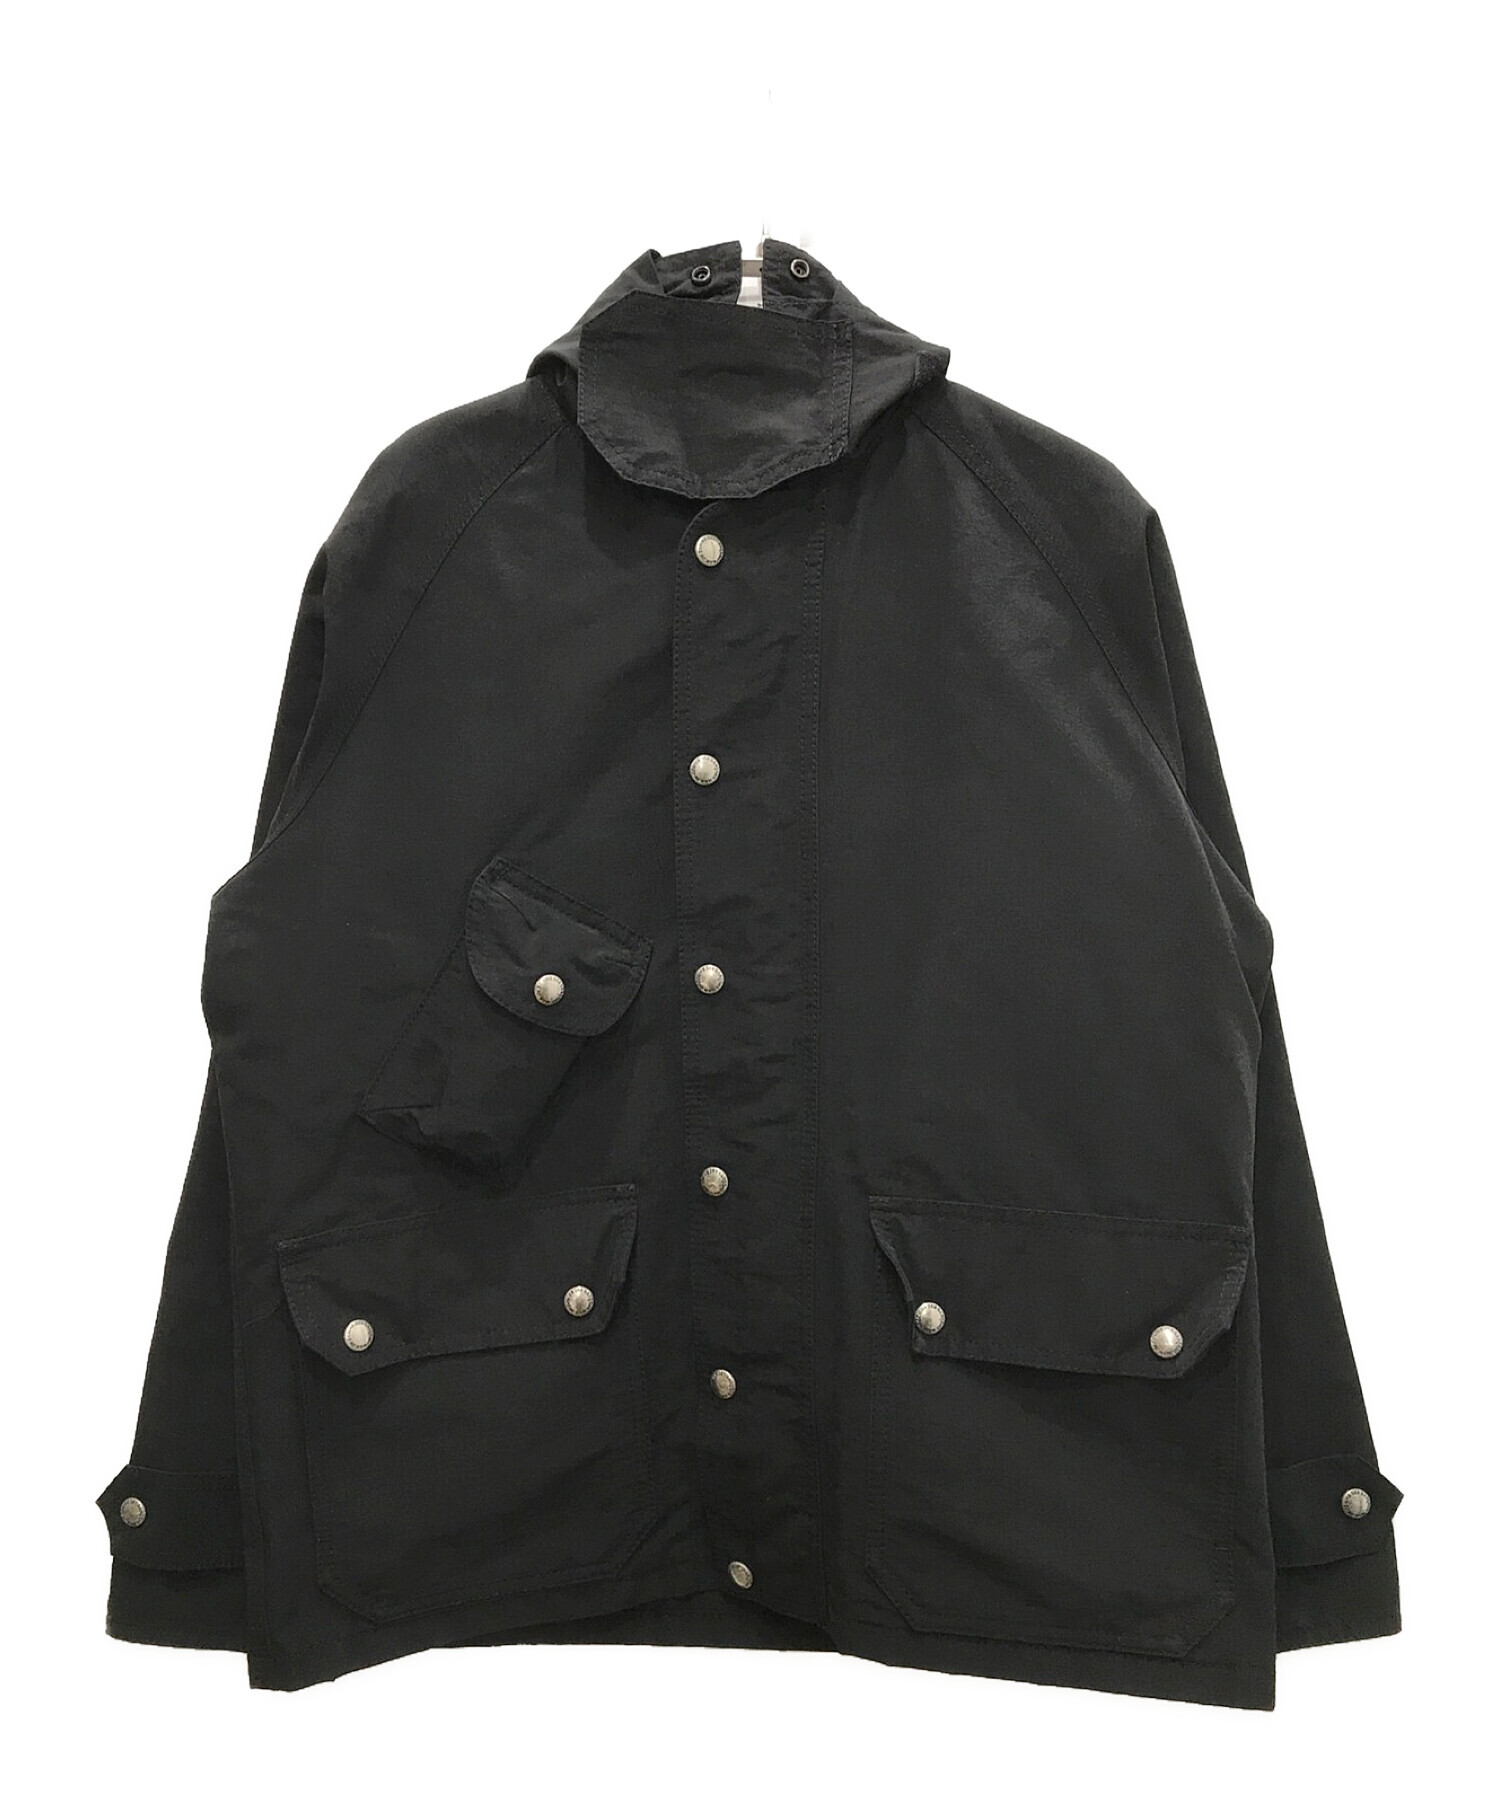 junyawatanabe comme des garcons マウンテパーカーUNDE